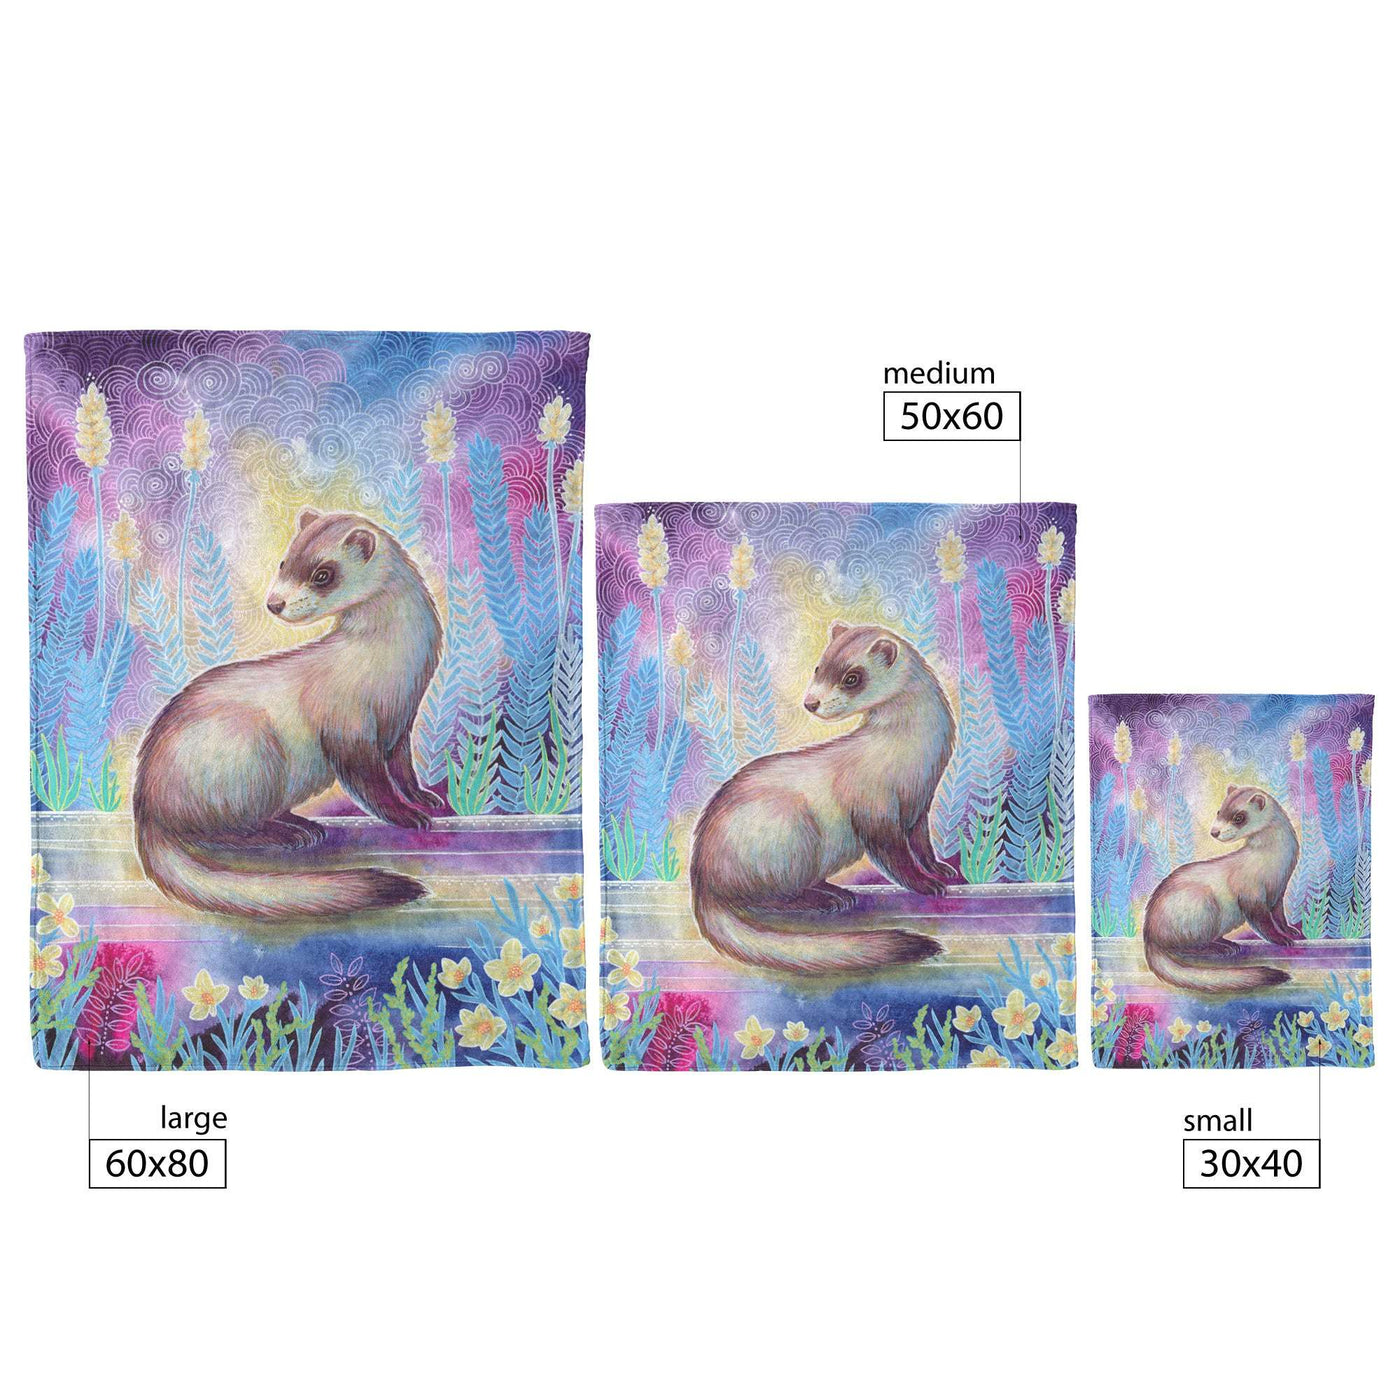 Three Ferret Blankets featuring an illustrated ferret in a whimsical forest setting, displayed in large, medium, and small sizes with their dimensions noted.